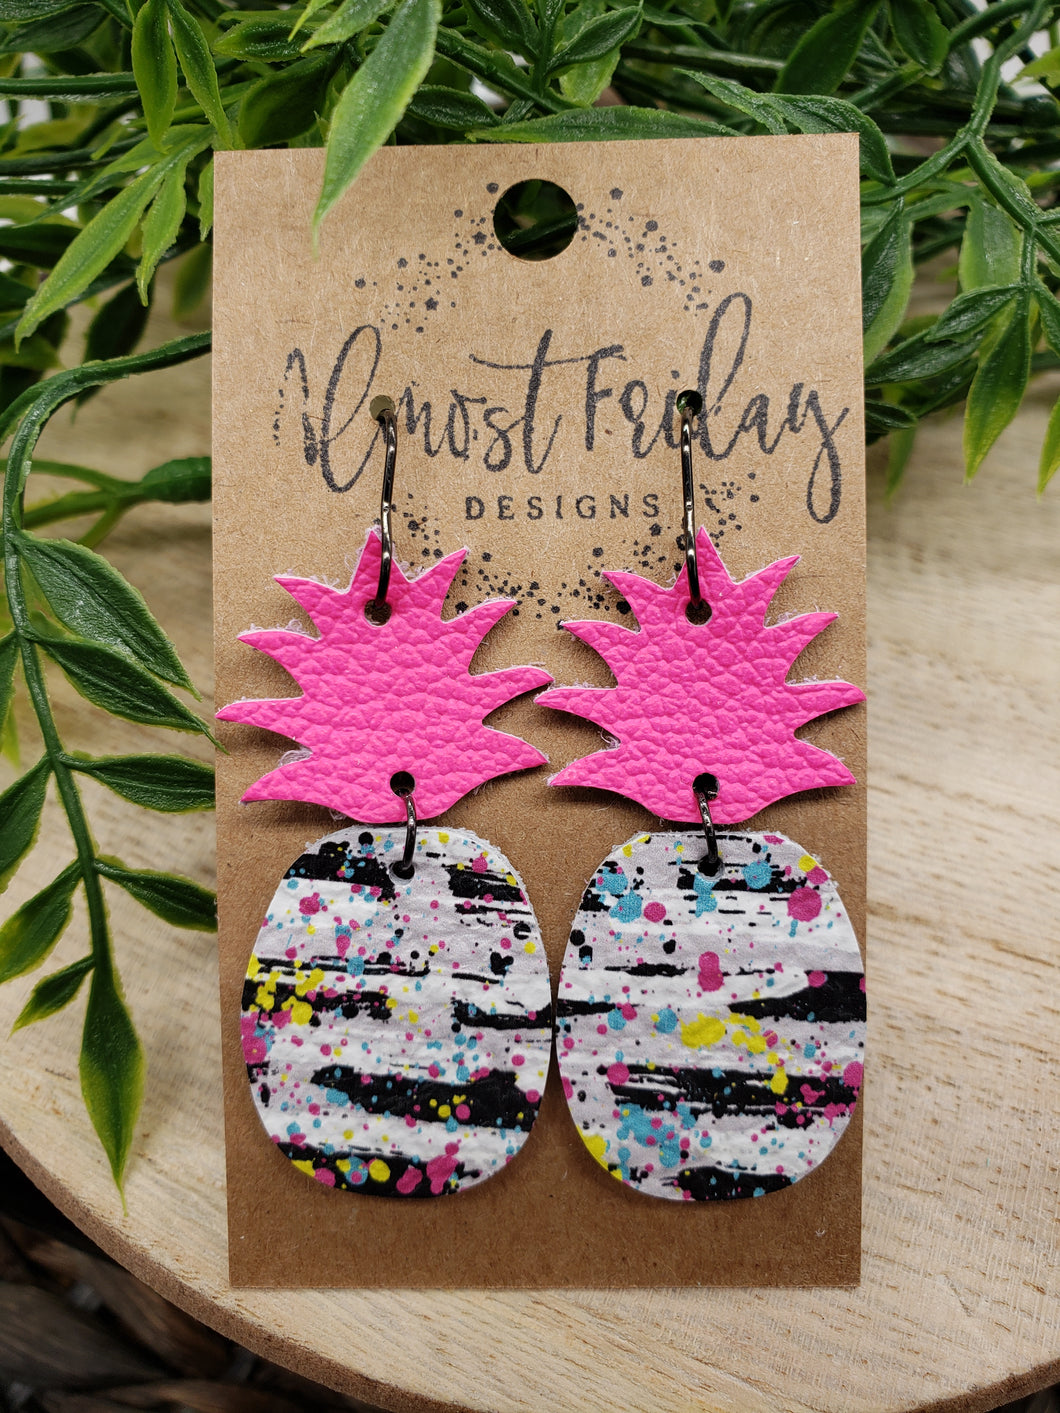 Genuine Leather Earrings - Pineapple - Summer Earrings - Colorful - White - Summer - Statement Earrings - Neon - Striped Earrings - Black and White Leather